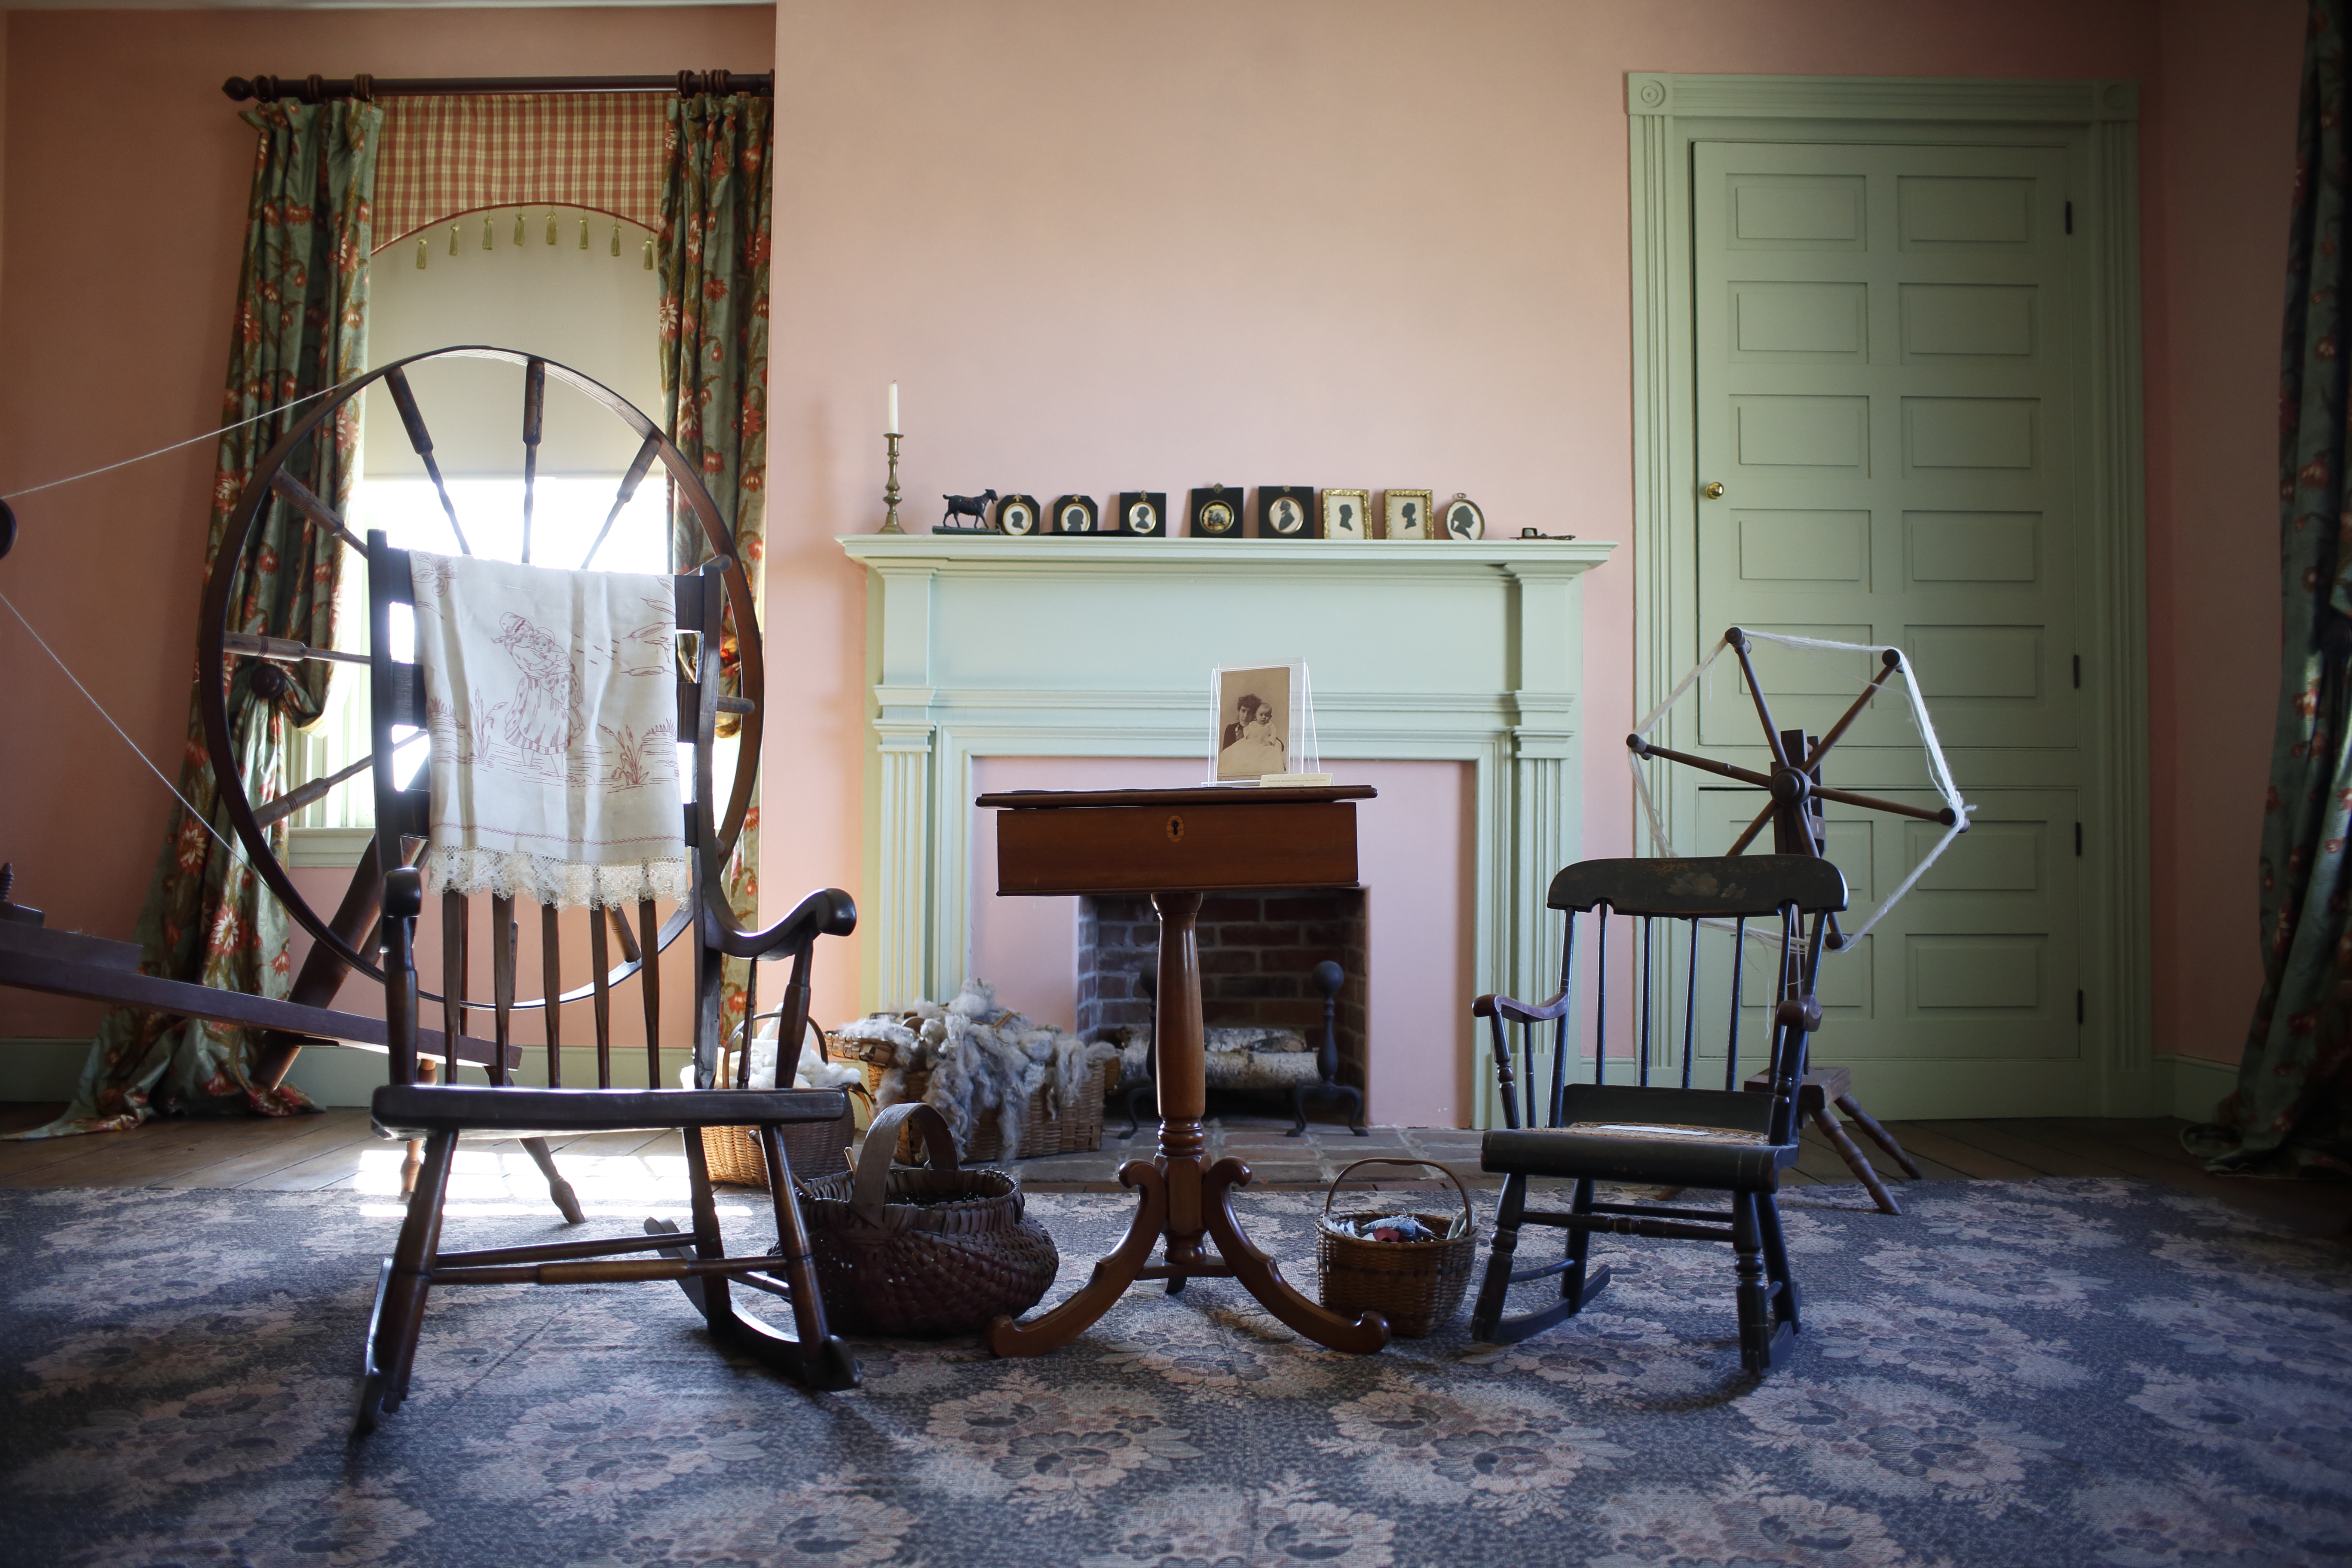 A photo showing empty rocking chairs in front of a fireplace in an historic home. A spinning wheel is visible. 